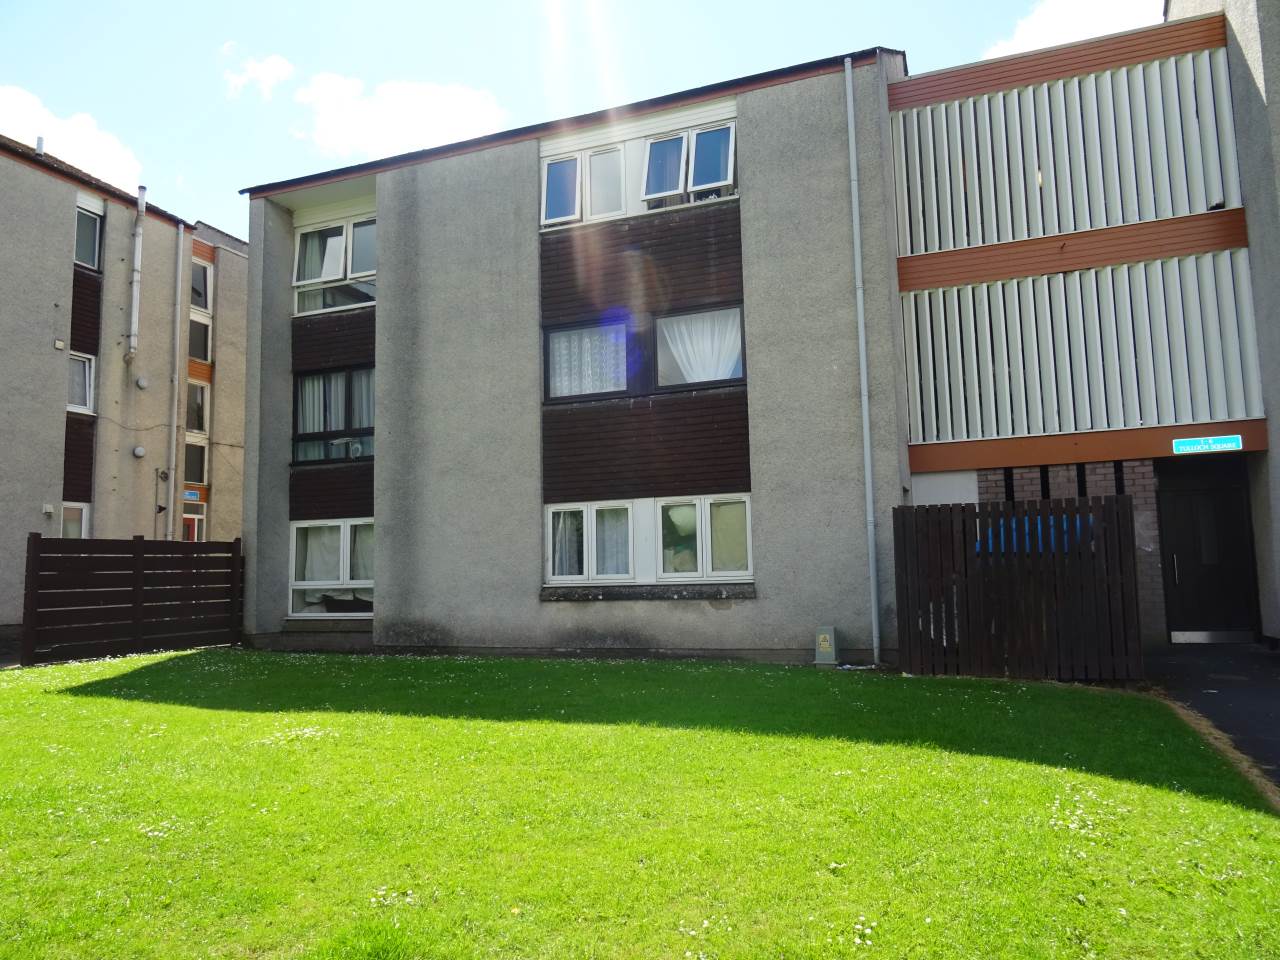 2 Bed 1st Floor Flat – Tulloch Square, Perth